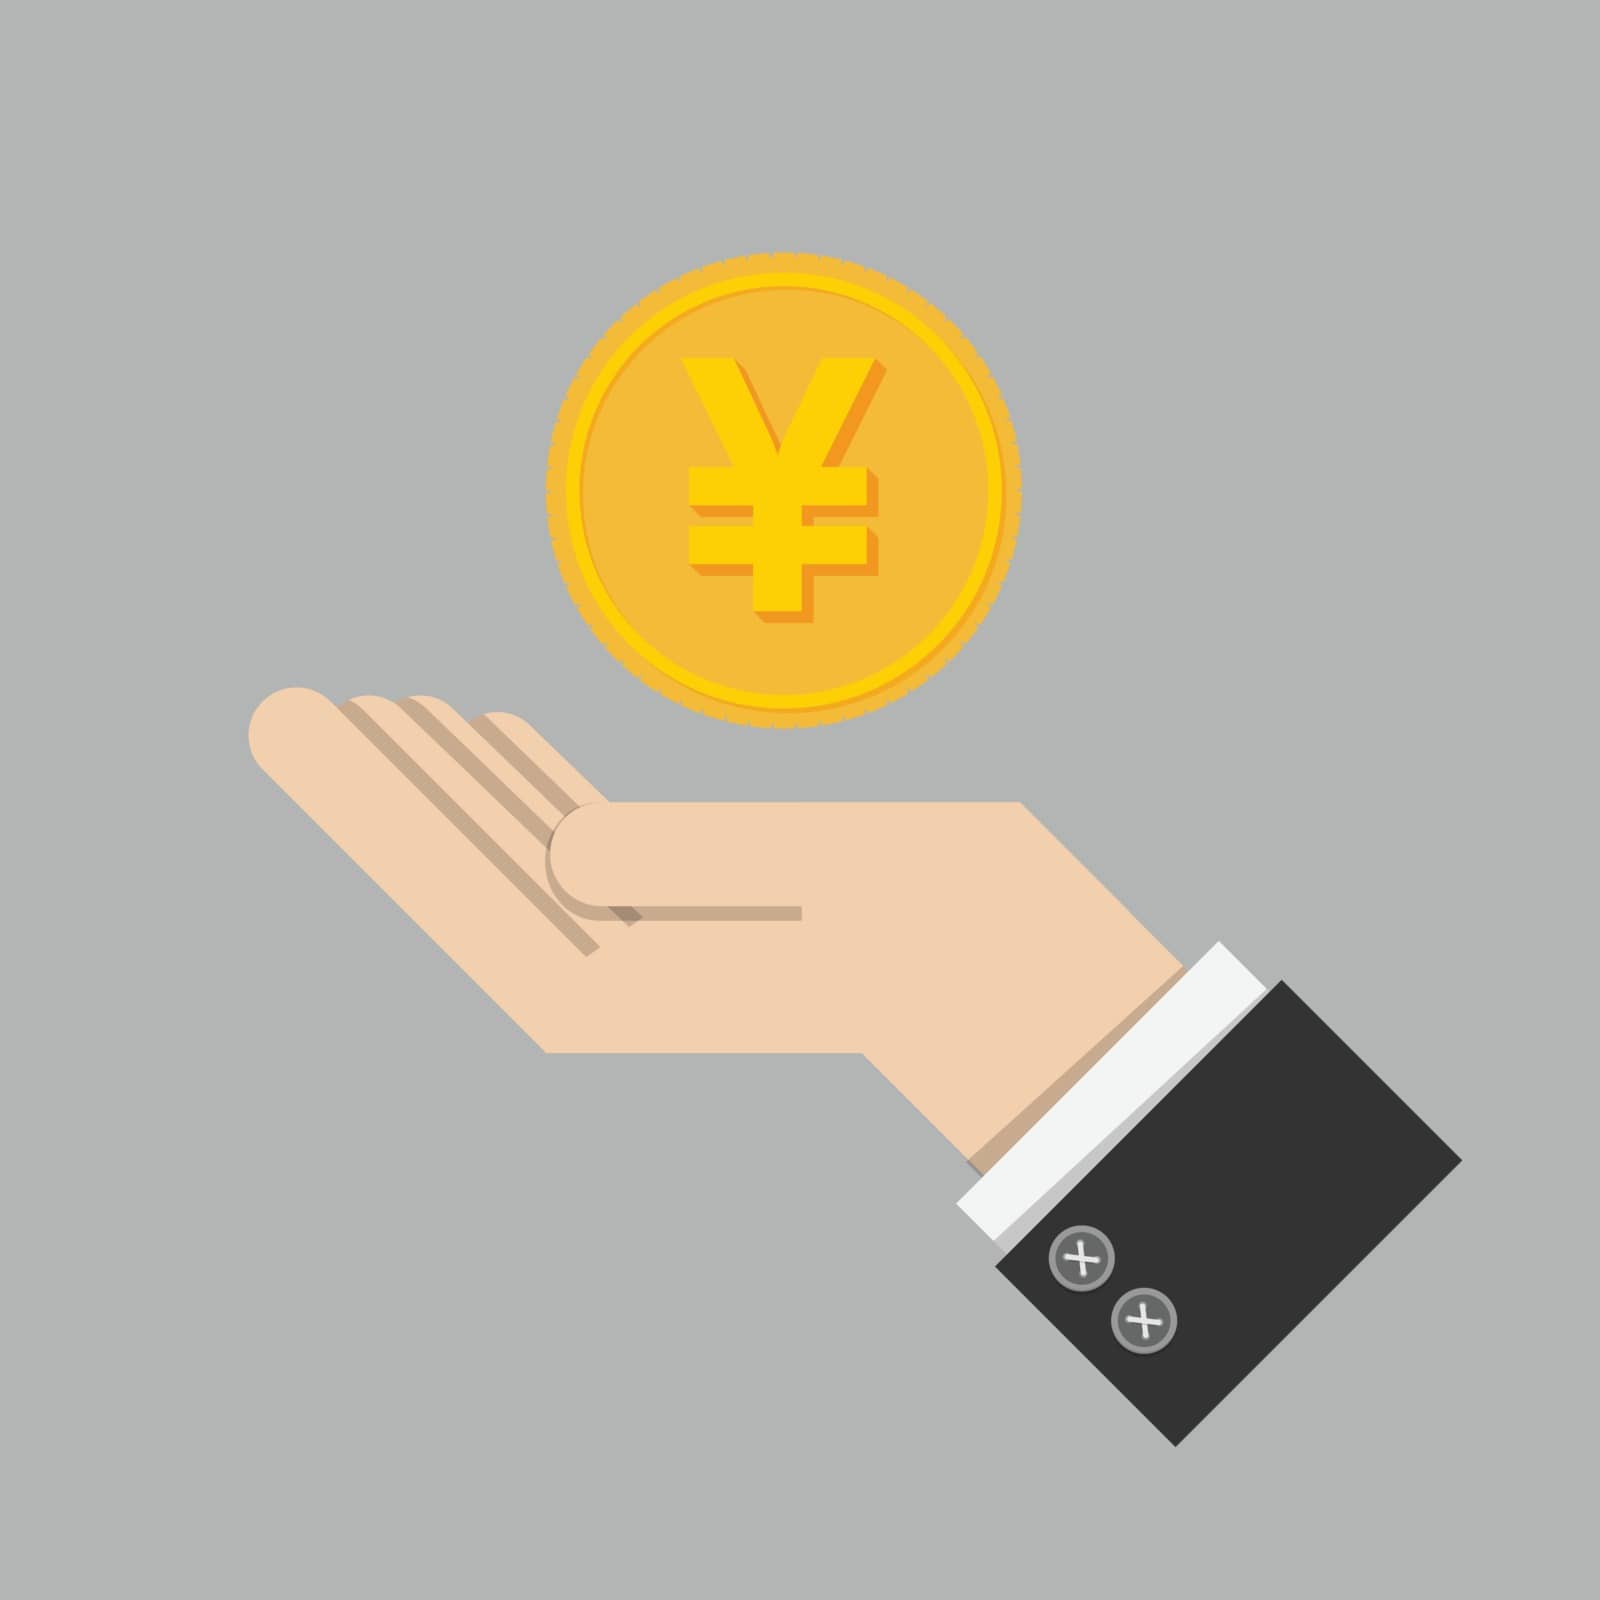 investment return concept. gold coin with sign of Japanese Yen currency on hand, palm of businessman. invest growth, finance plan, personal management, investment portfolio. vector illustration EPS10